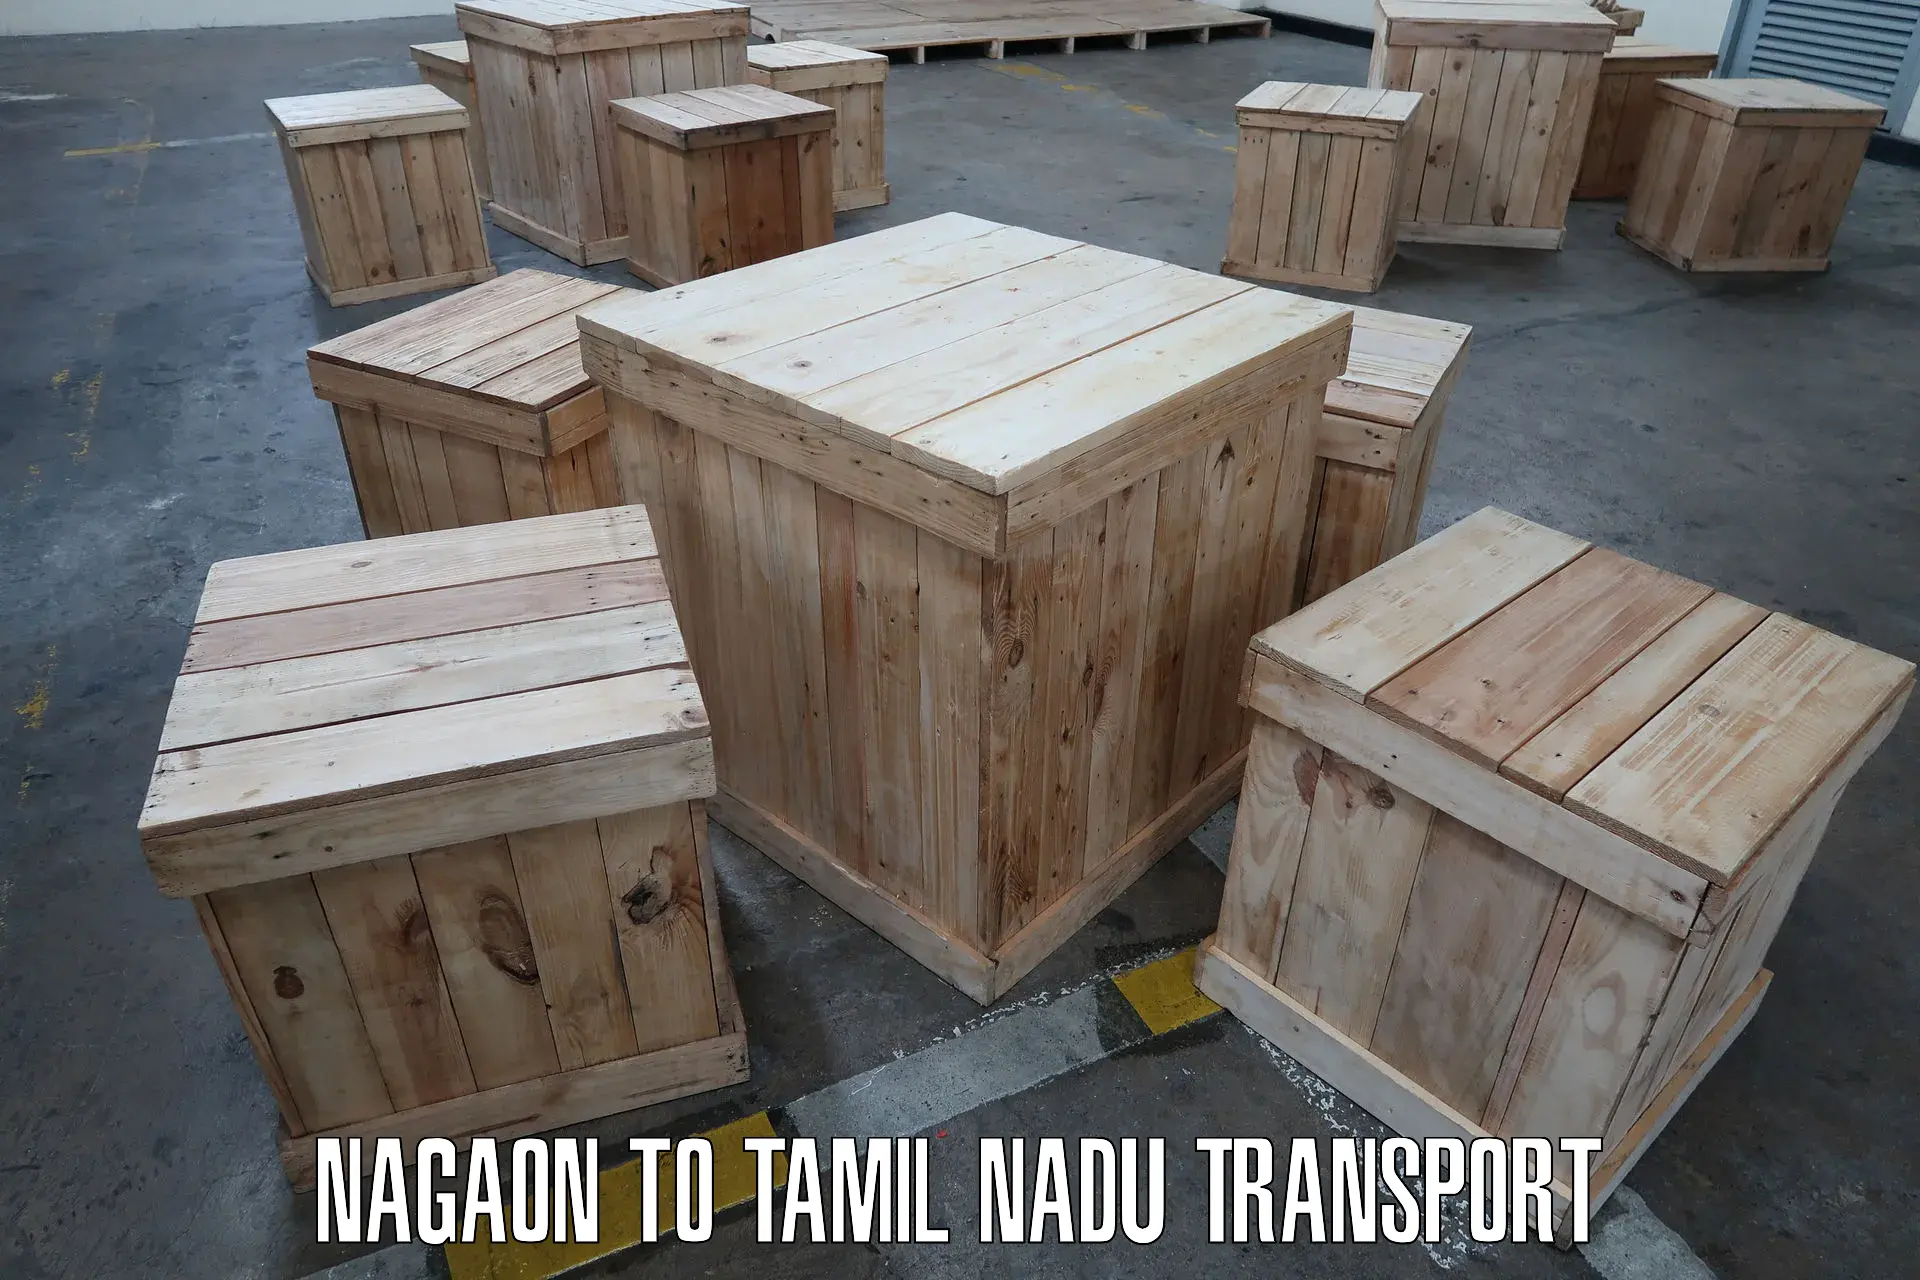 Air freight transport services Nagaon to Coimbatore